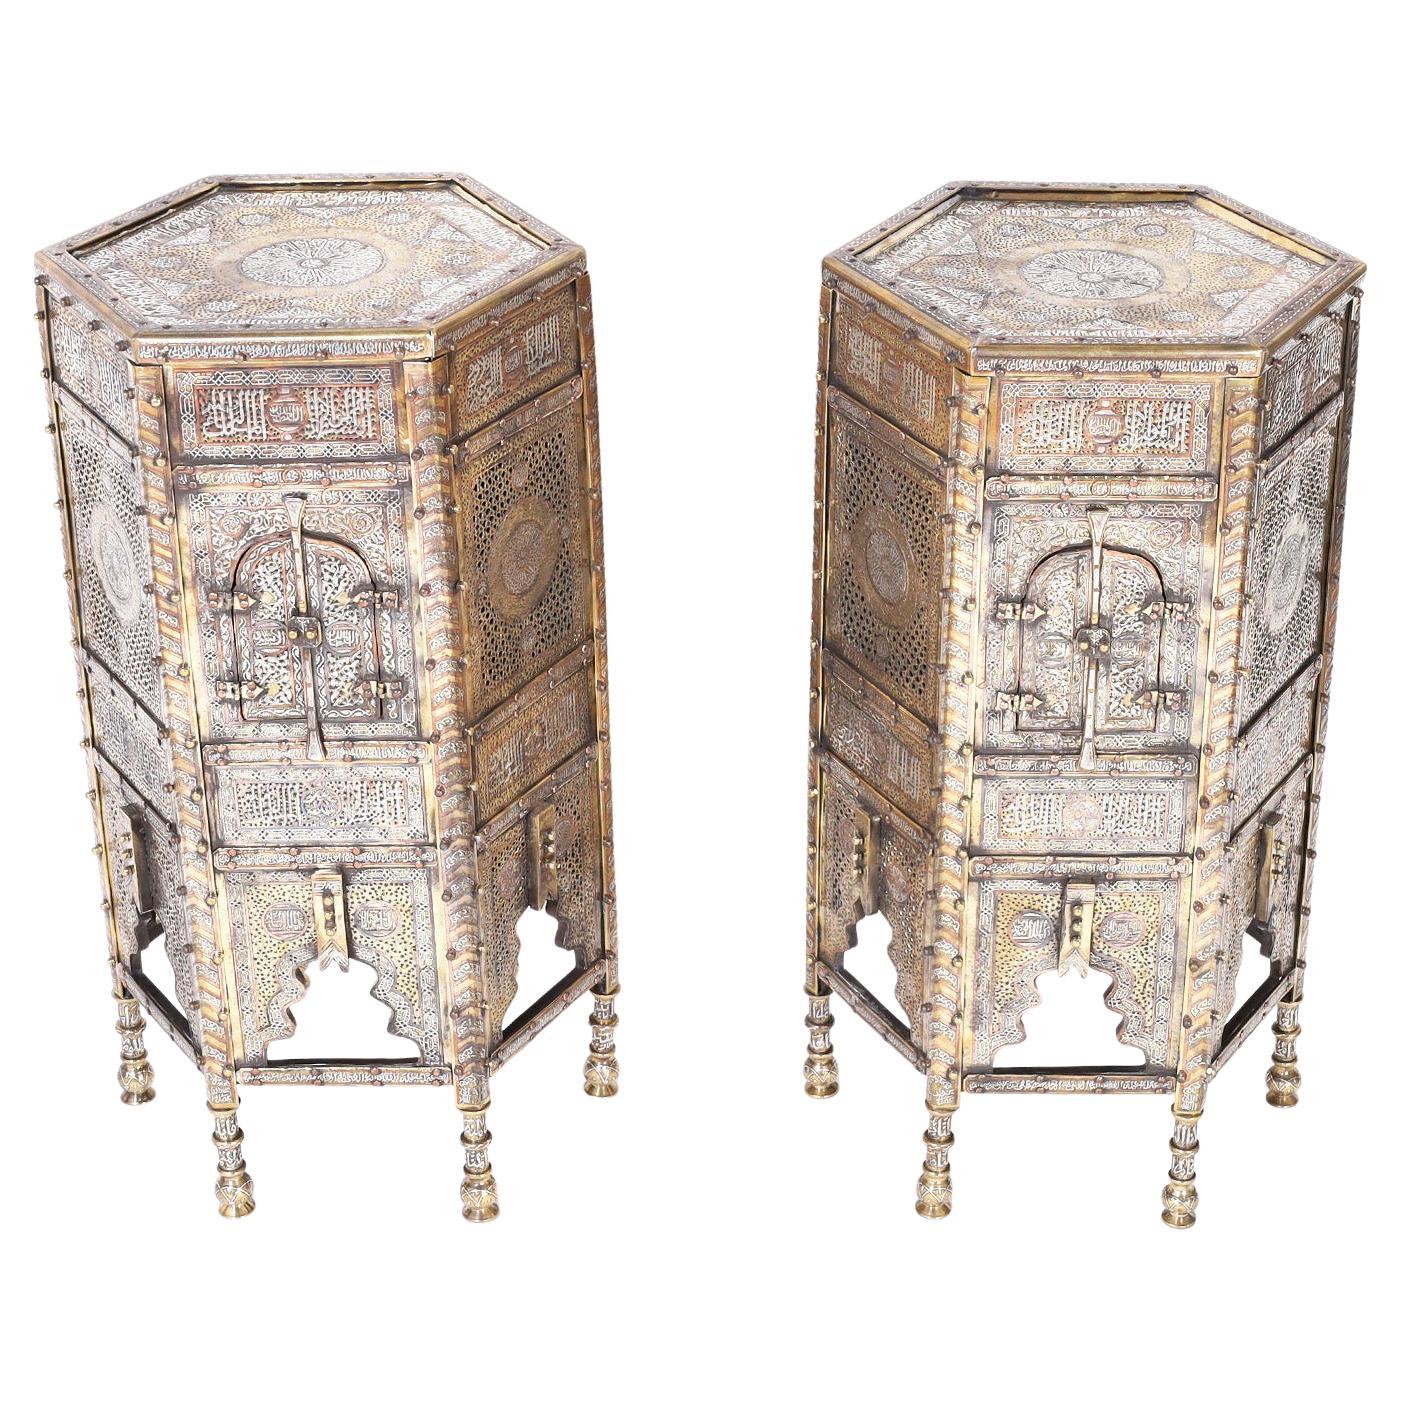 Pair of Antique Moroccan Stands